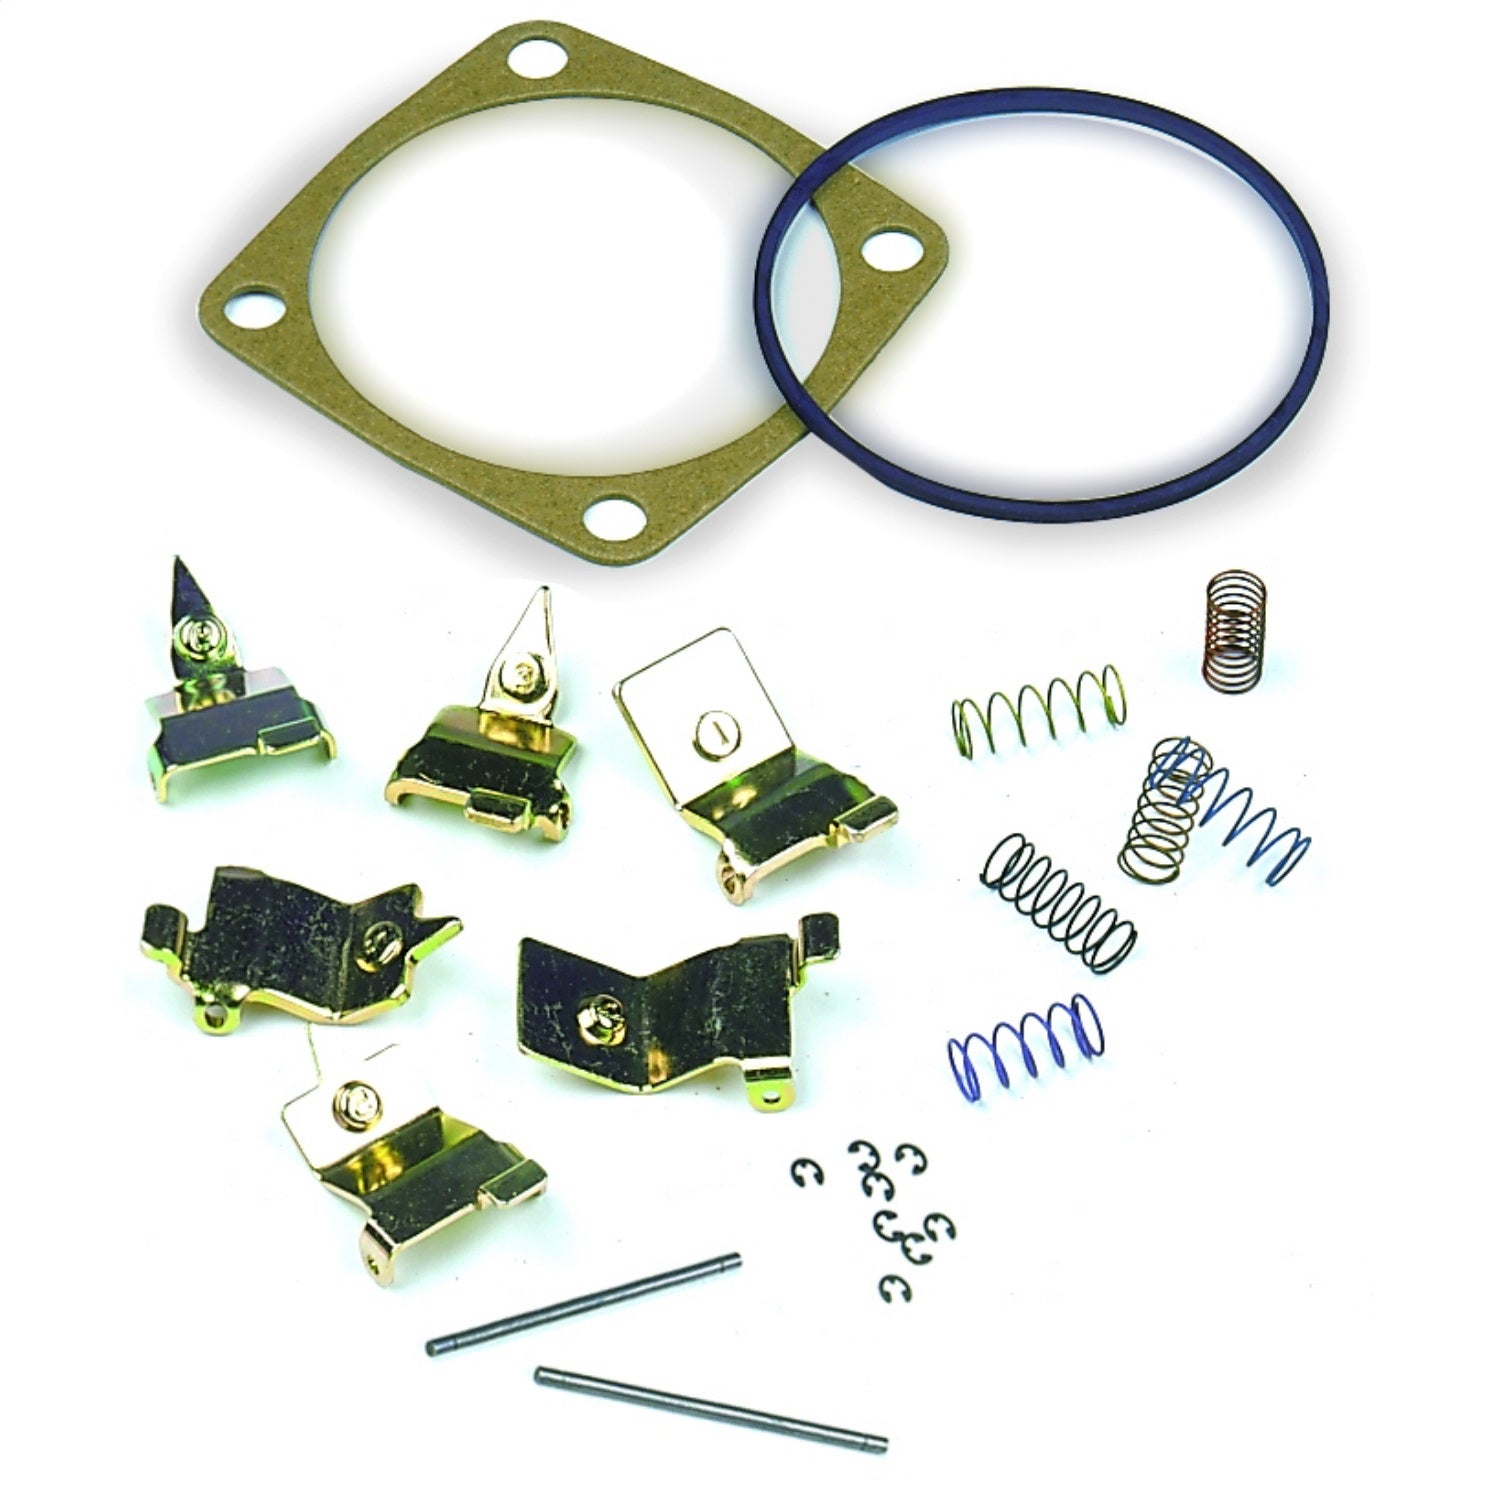 B&M 20248 Governor Recalibration Kit For TH-700R4, TH-400 and TH-350 Transmission